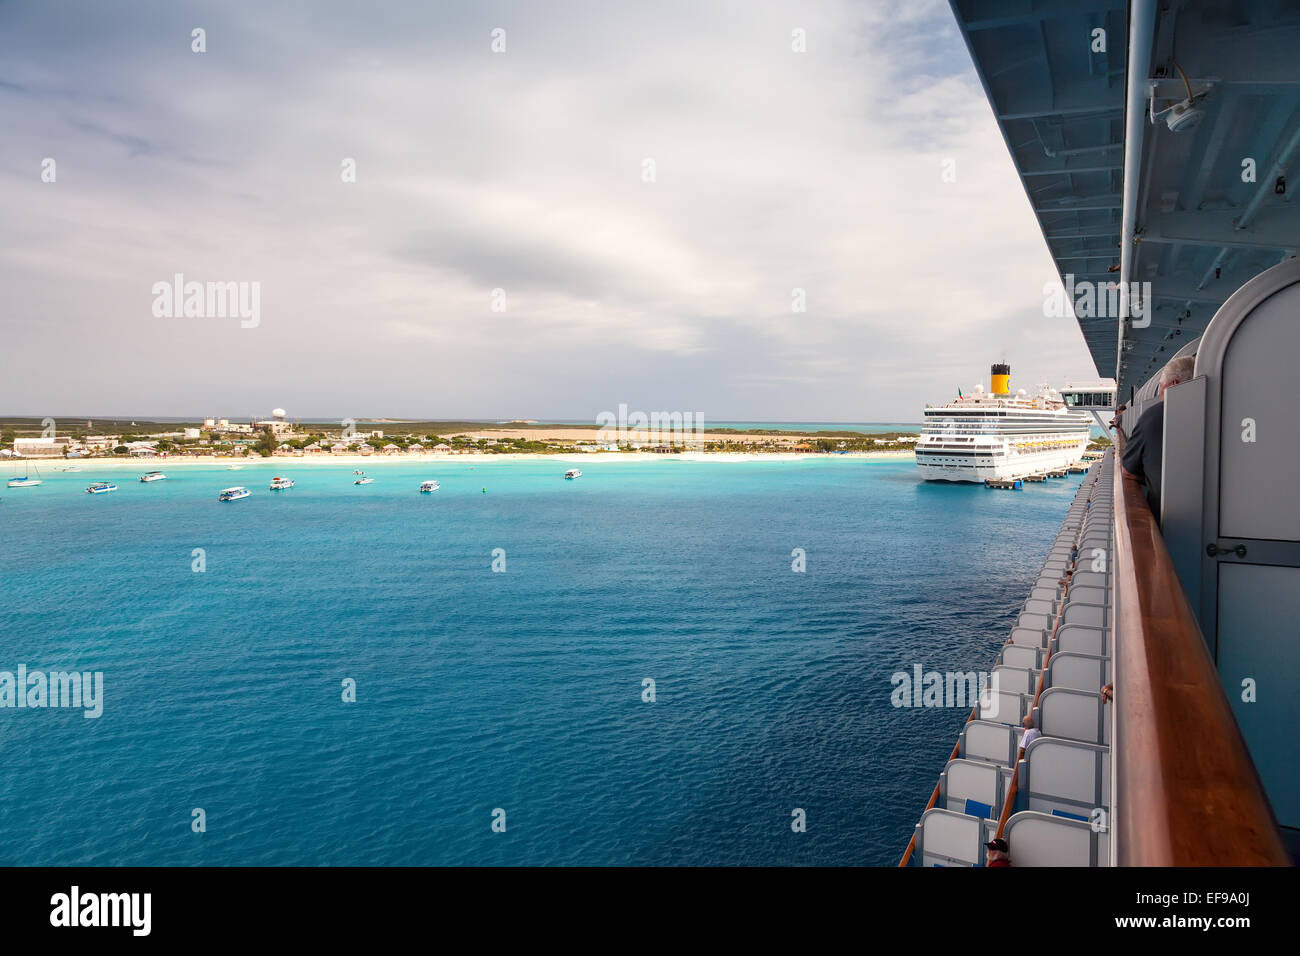 Grand Turk, Turks & Caicos - Feb. 12, 2010:  Luxury cruise ship entering the Port of Grand Turk, in the Turks & Caicos islands, Stock Photo